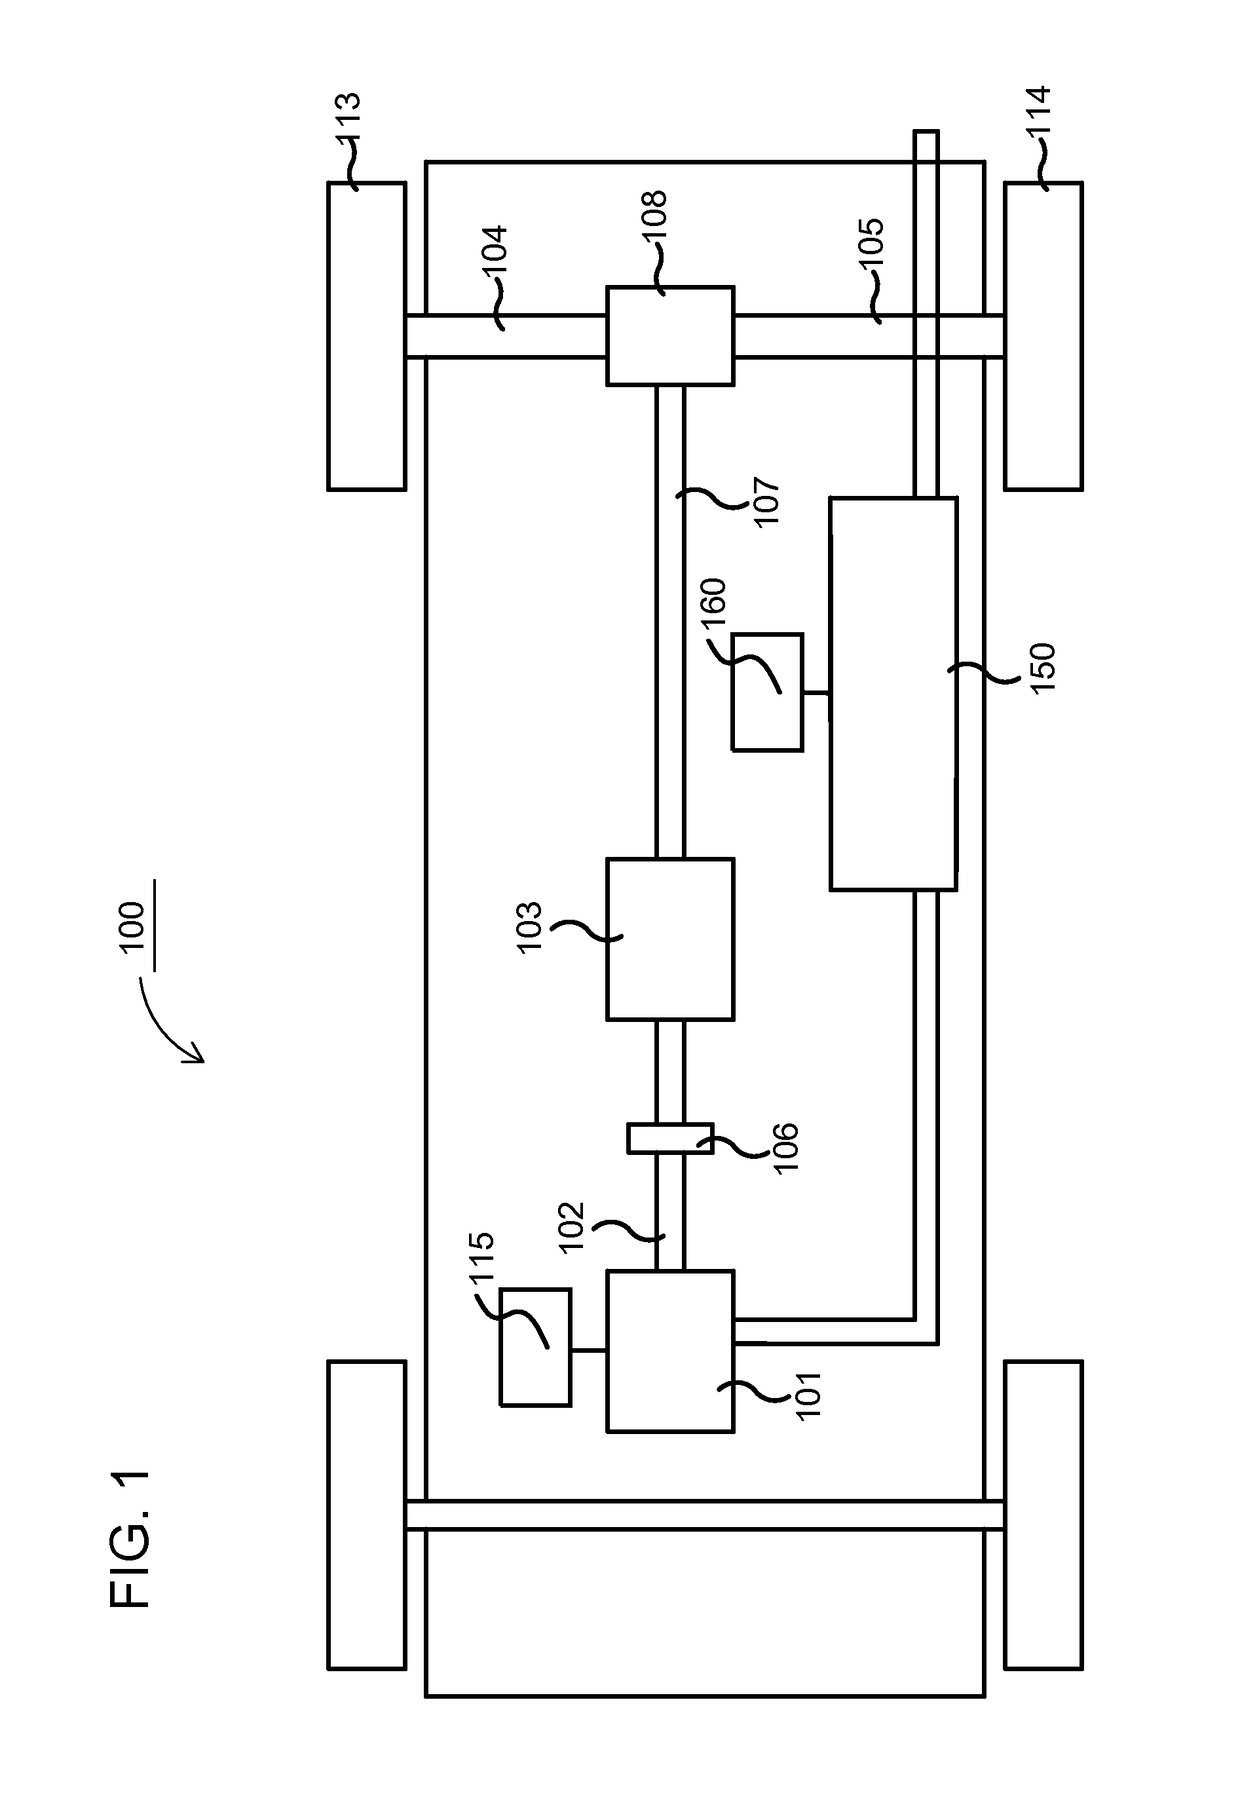 Exhaust treatment system and method for treatment of an exhaust gas stream